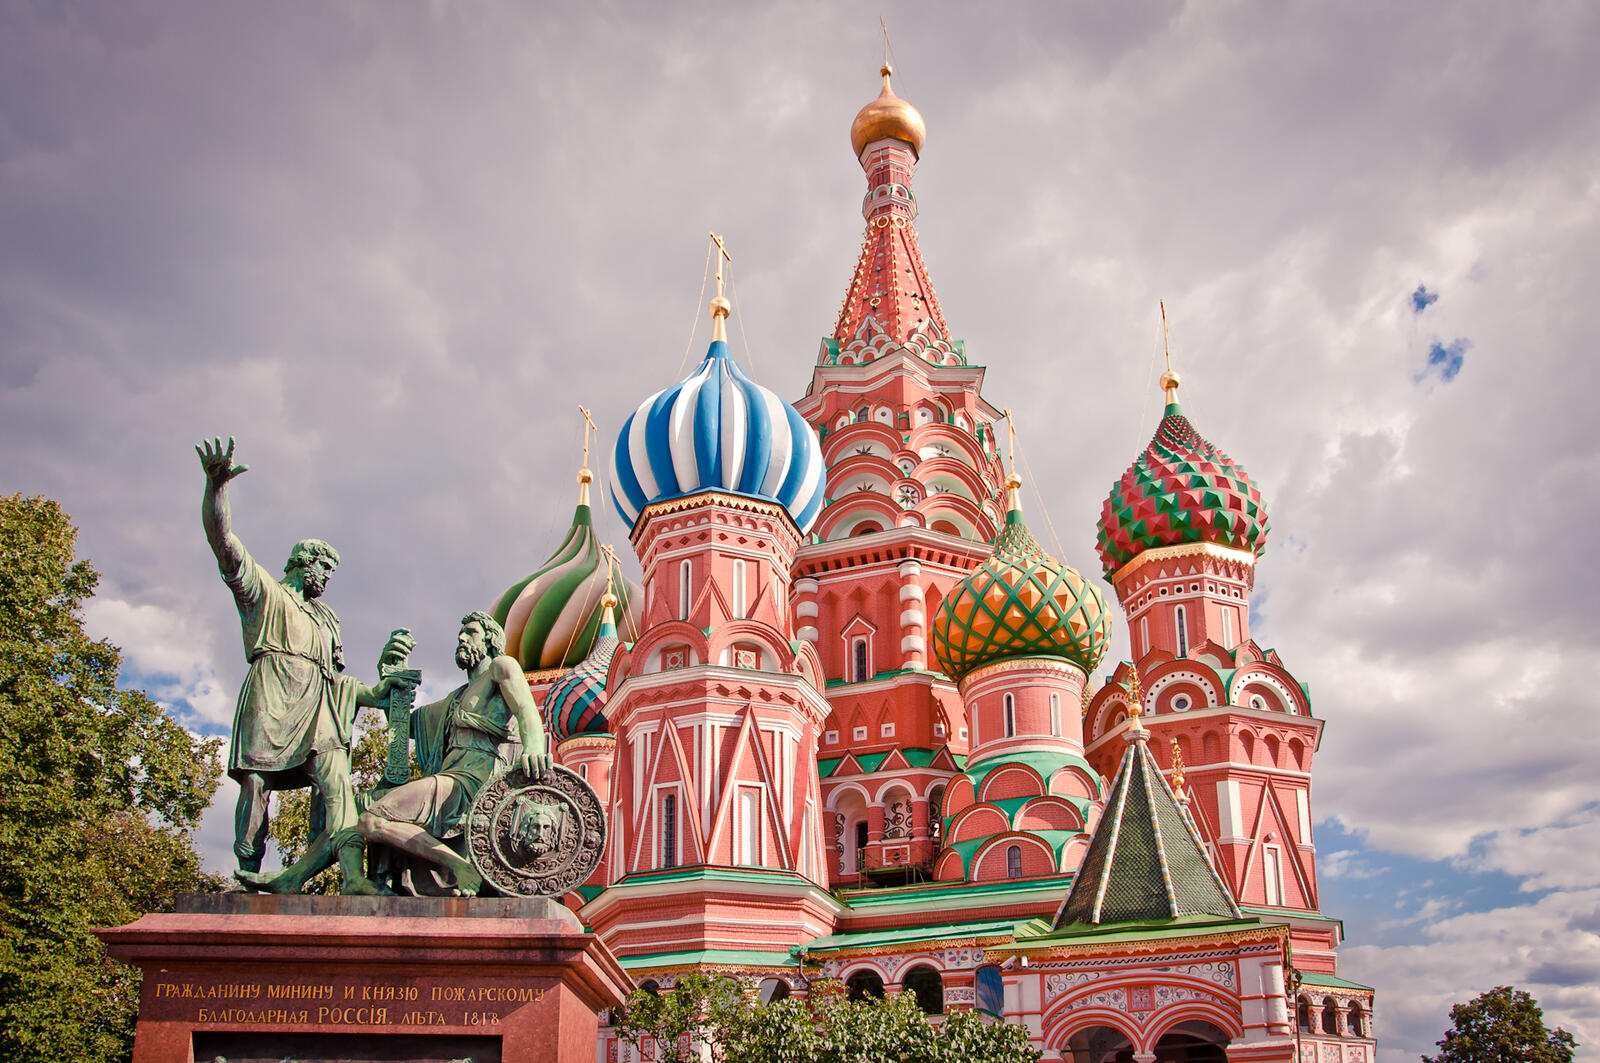 Wallpapers St Basil s Cathedral Moscow Russia on the desktop